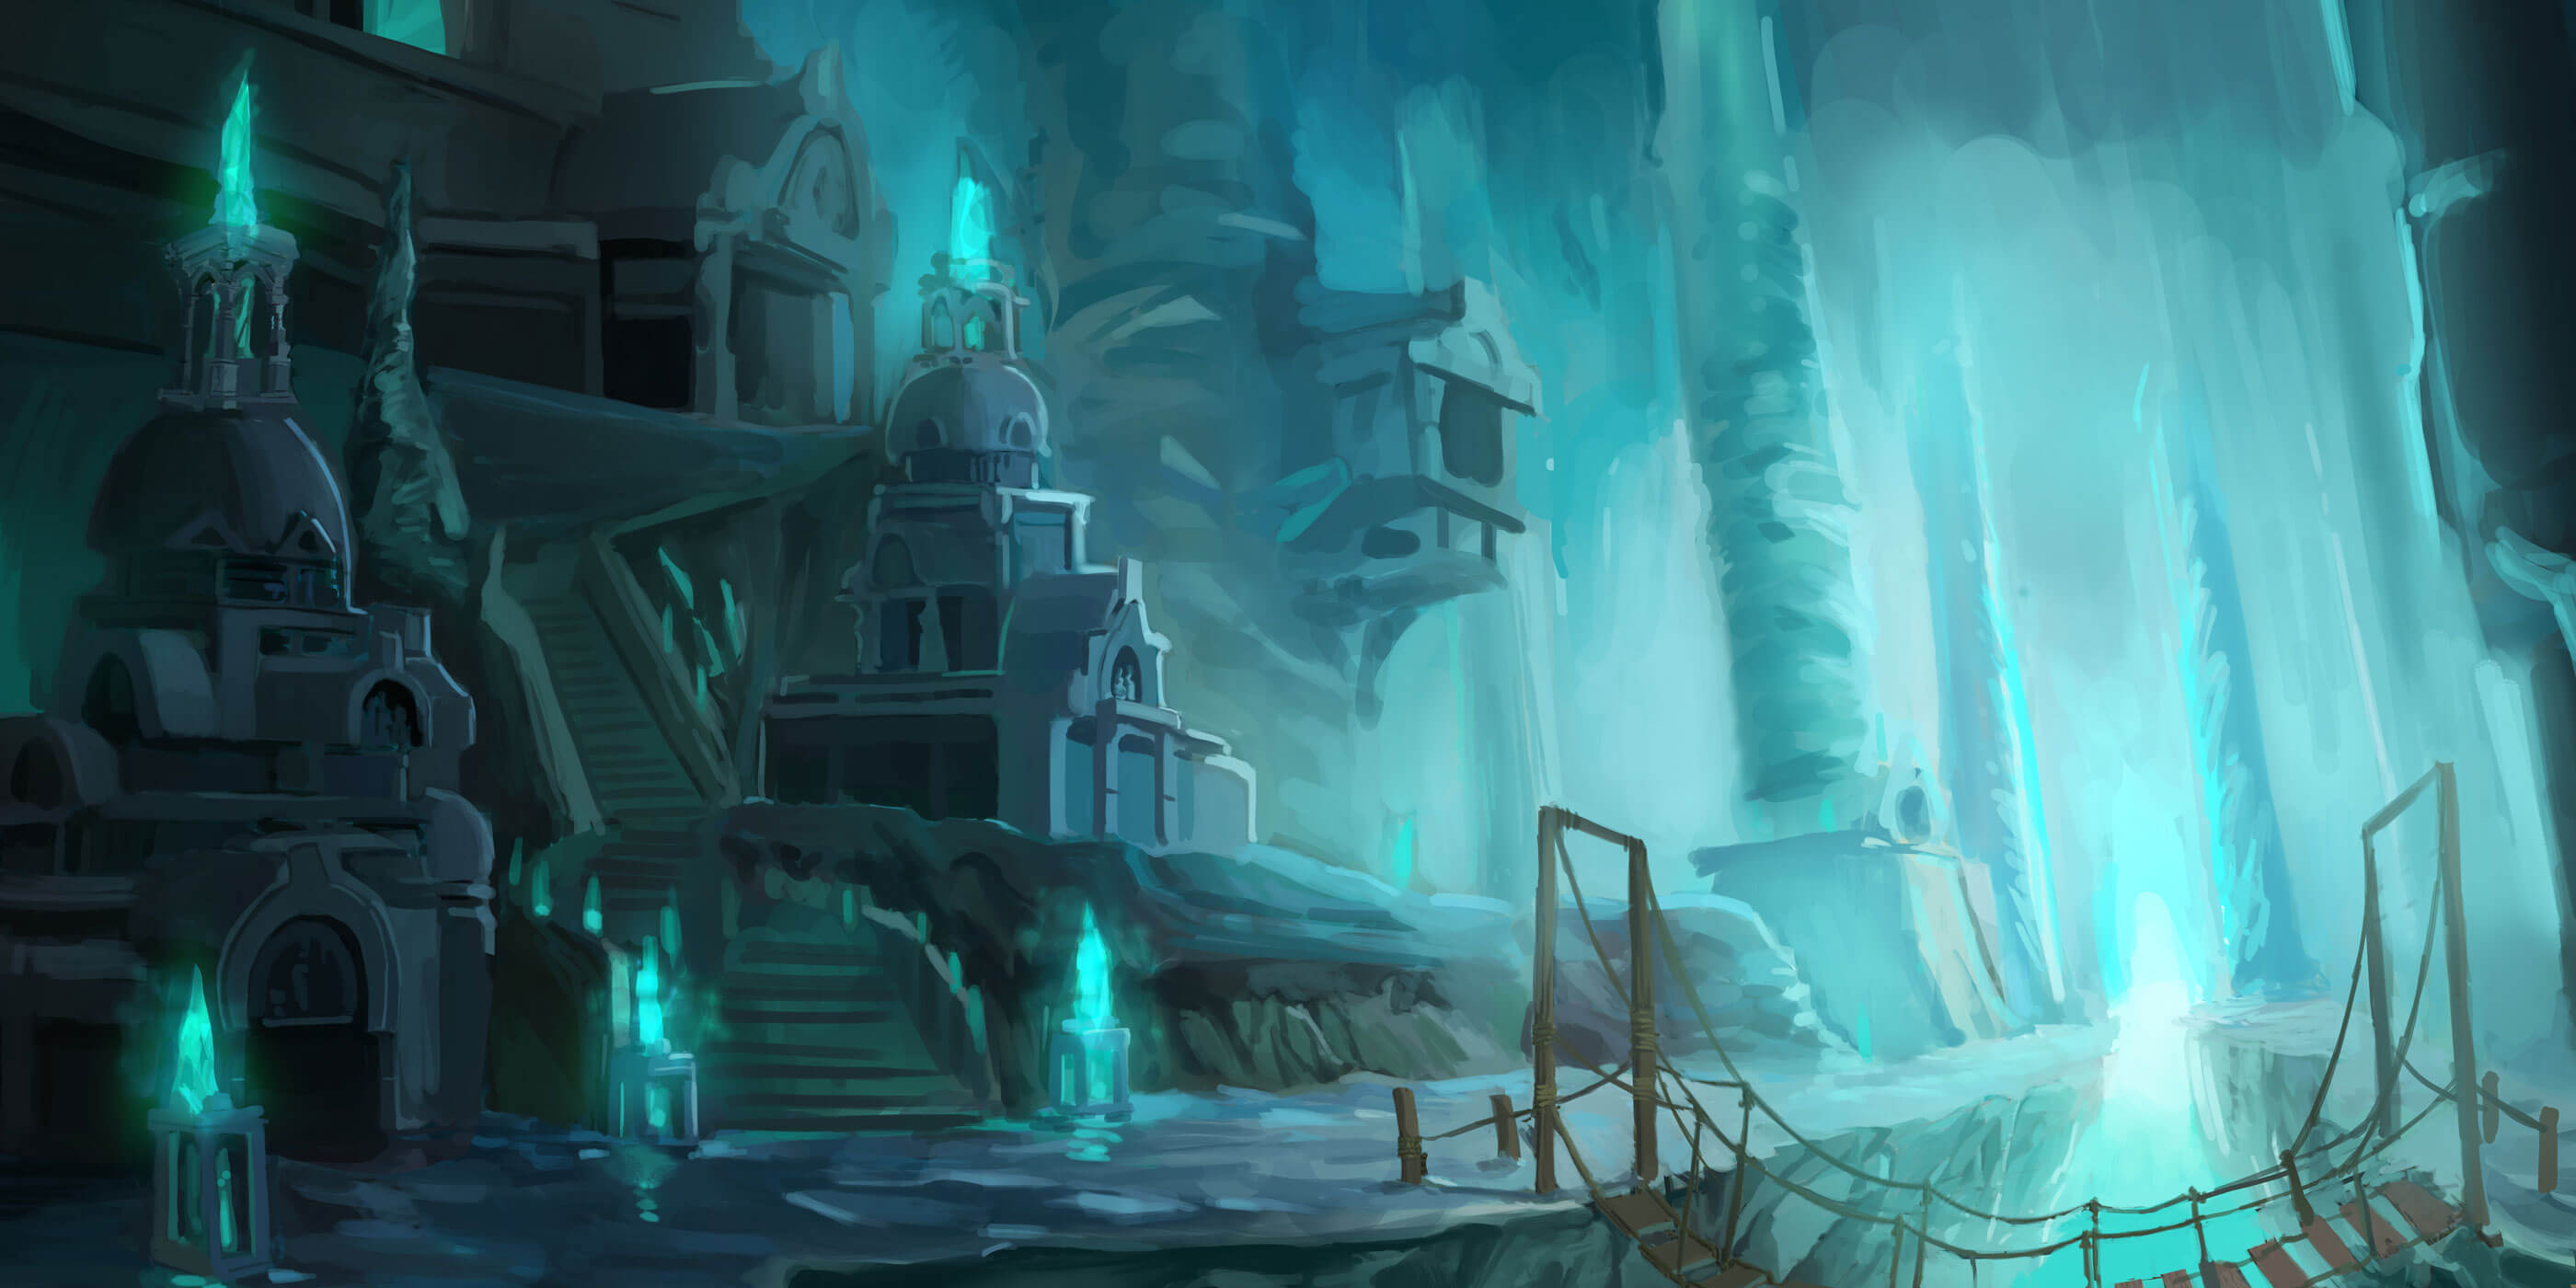 An underground city lit by an ethereal, blue light.